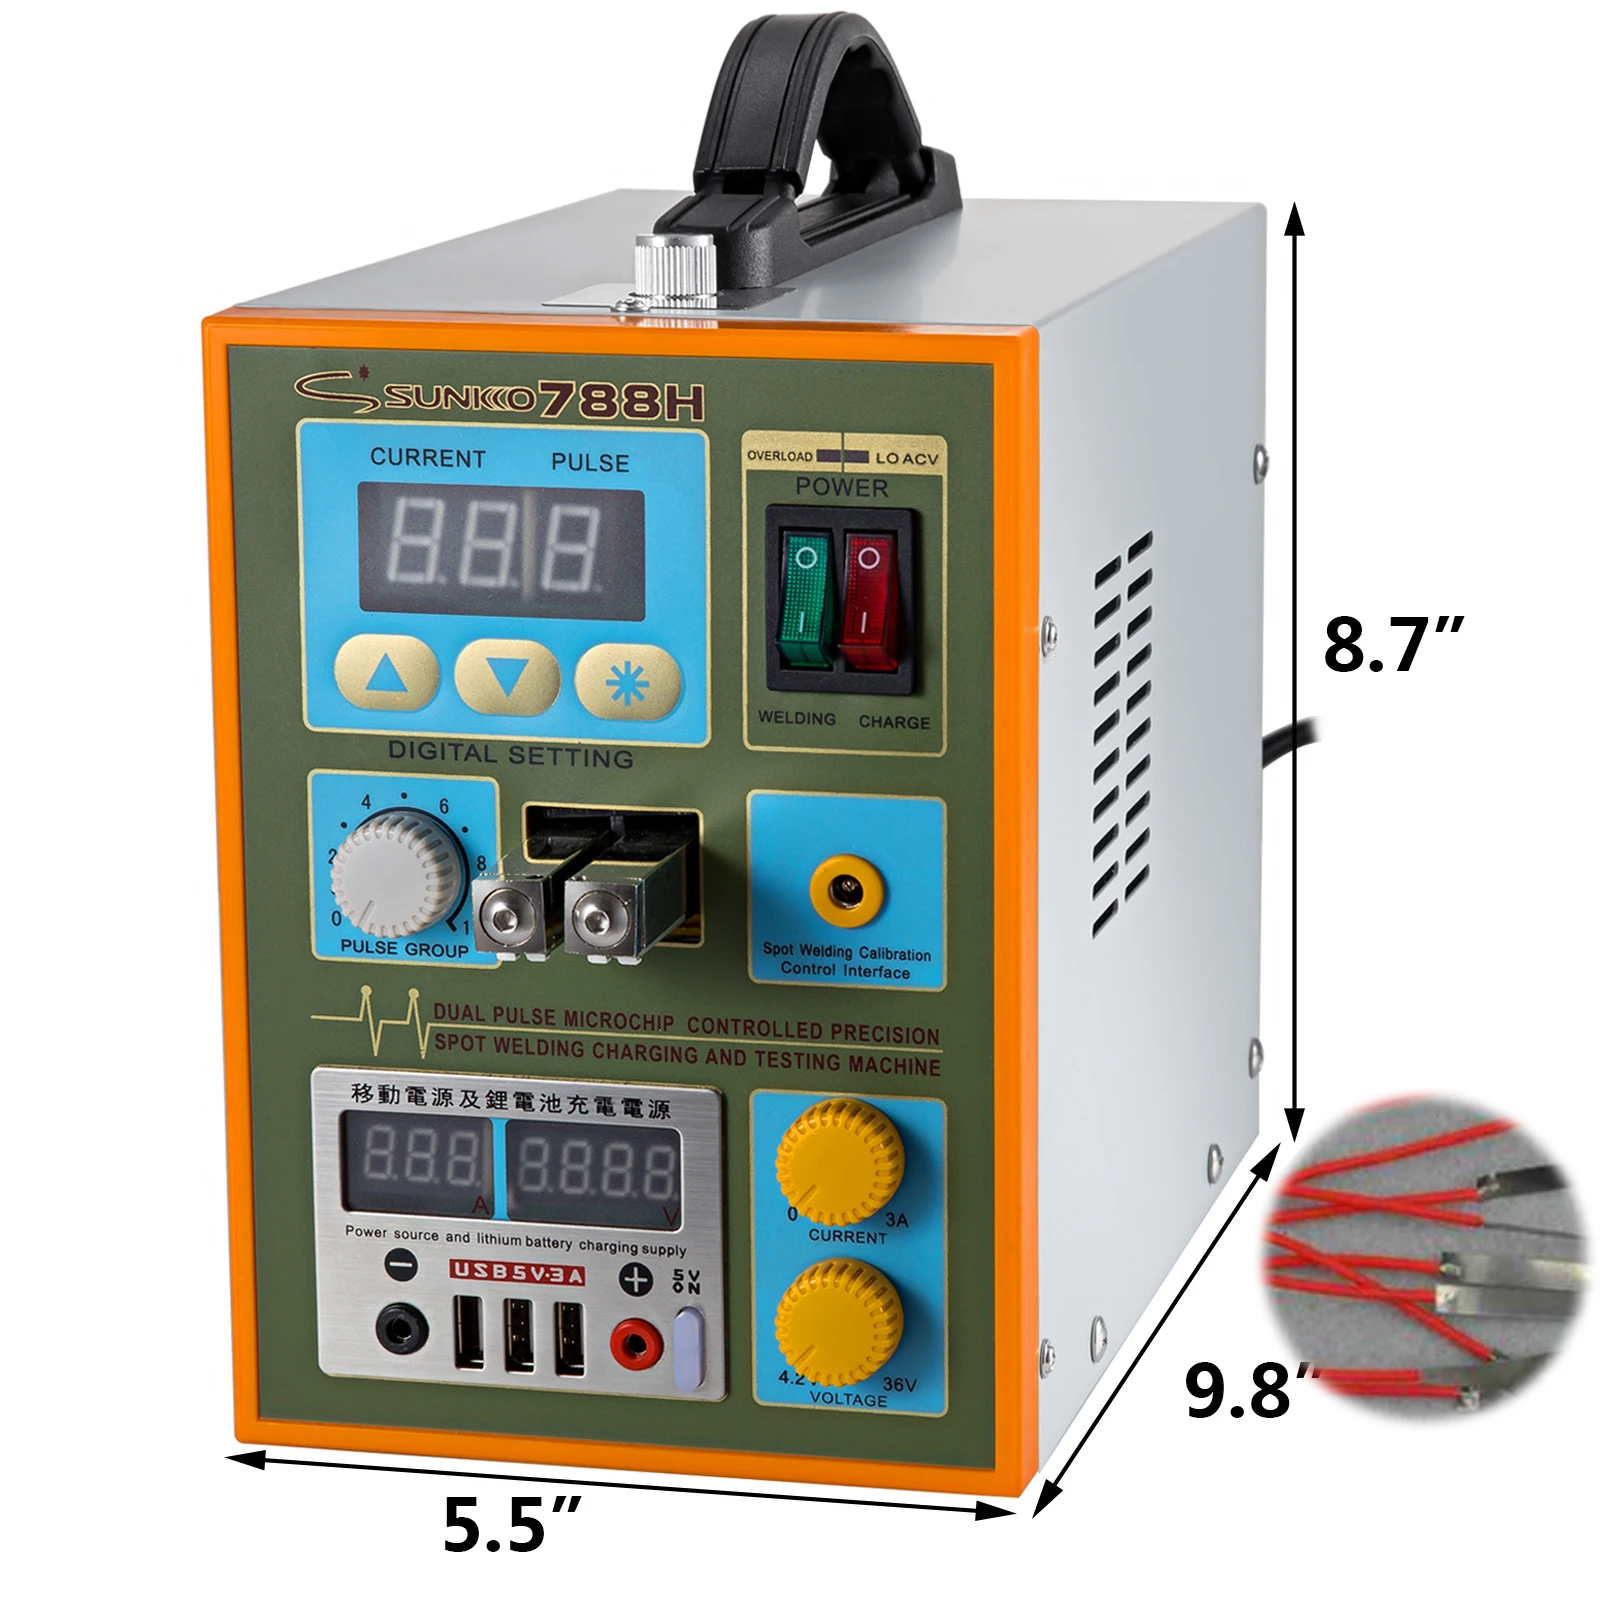 2-18 Pulse Group 788H-USB Battery Pulse Spot Welder w/ 1Kg Nickel Plated Steel Strip for 18650 With LED Lighting Function